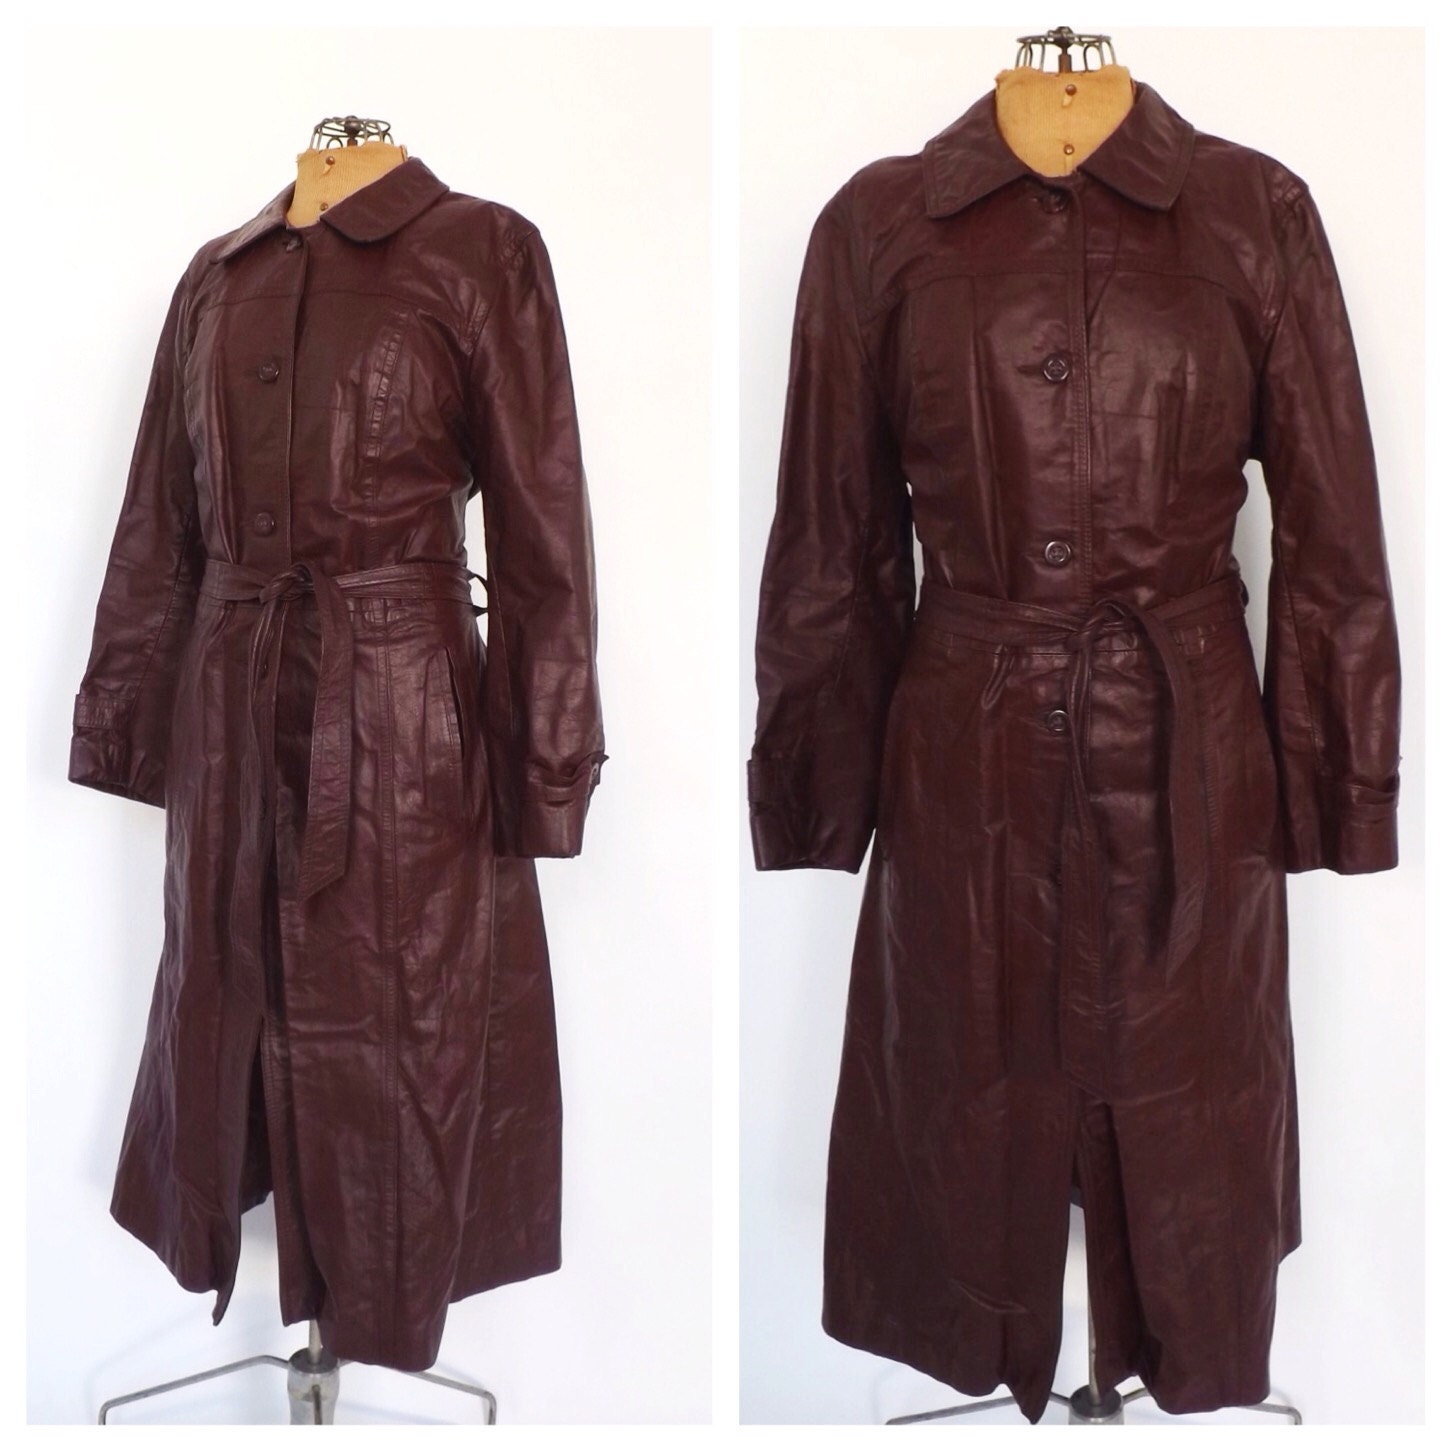 Iconic Vintage 1970s 60s Chestnut Brown Leather TRENCH COAT